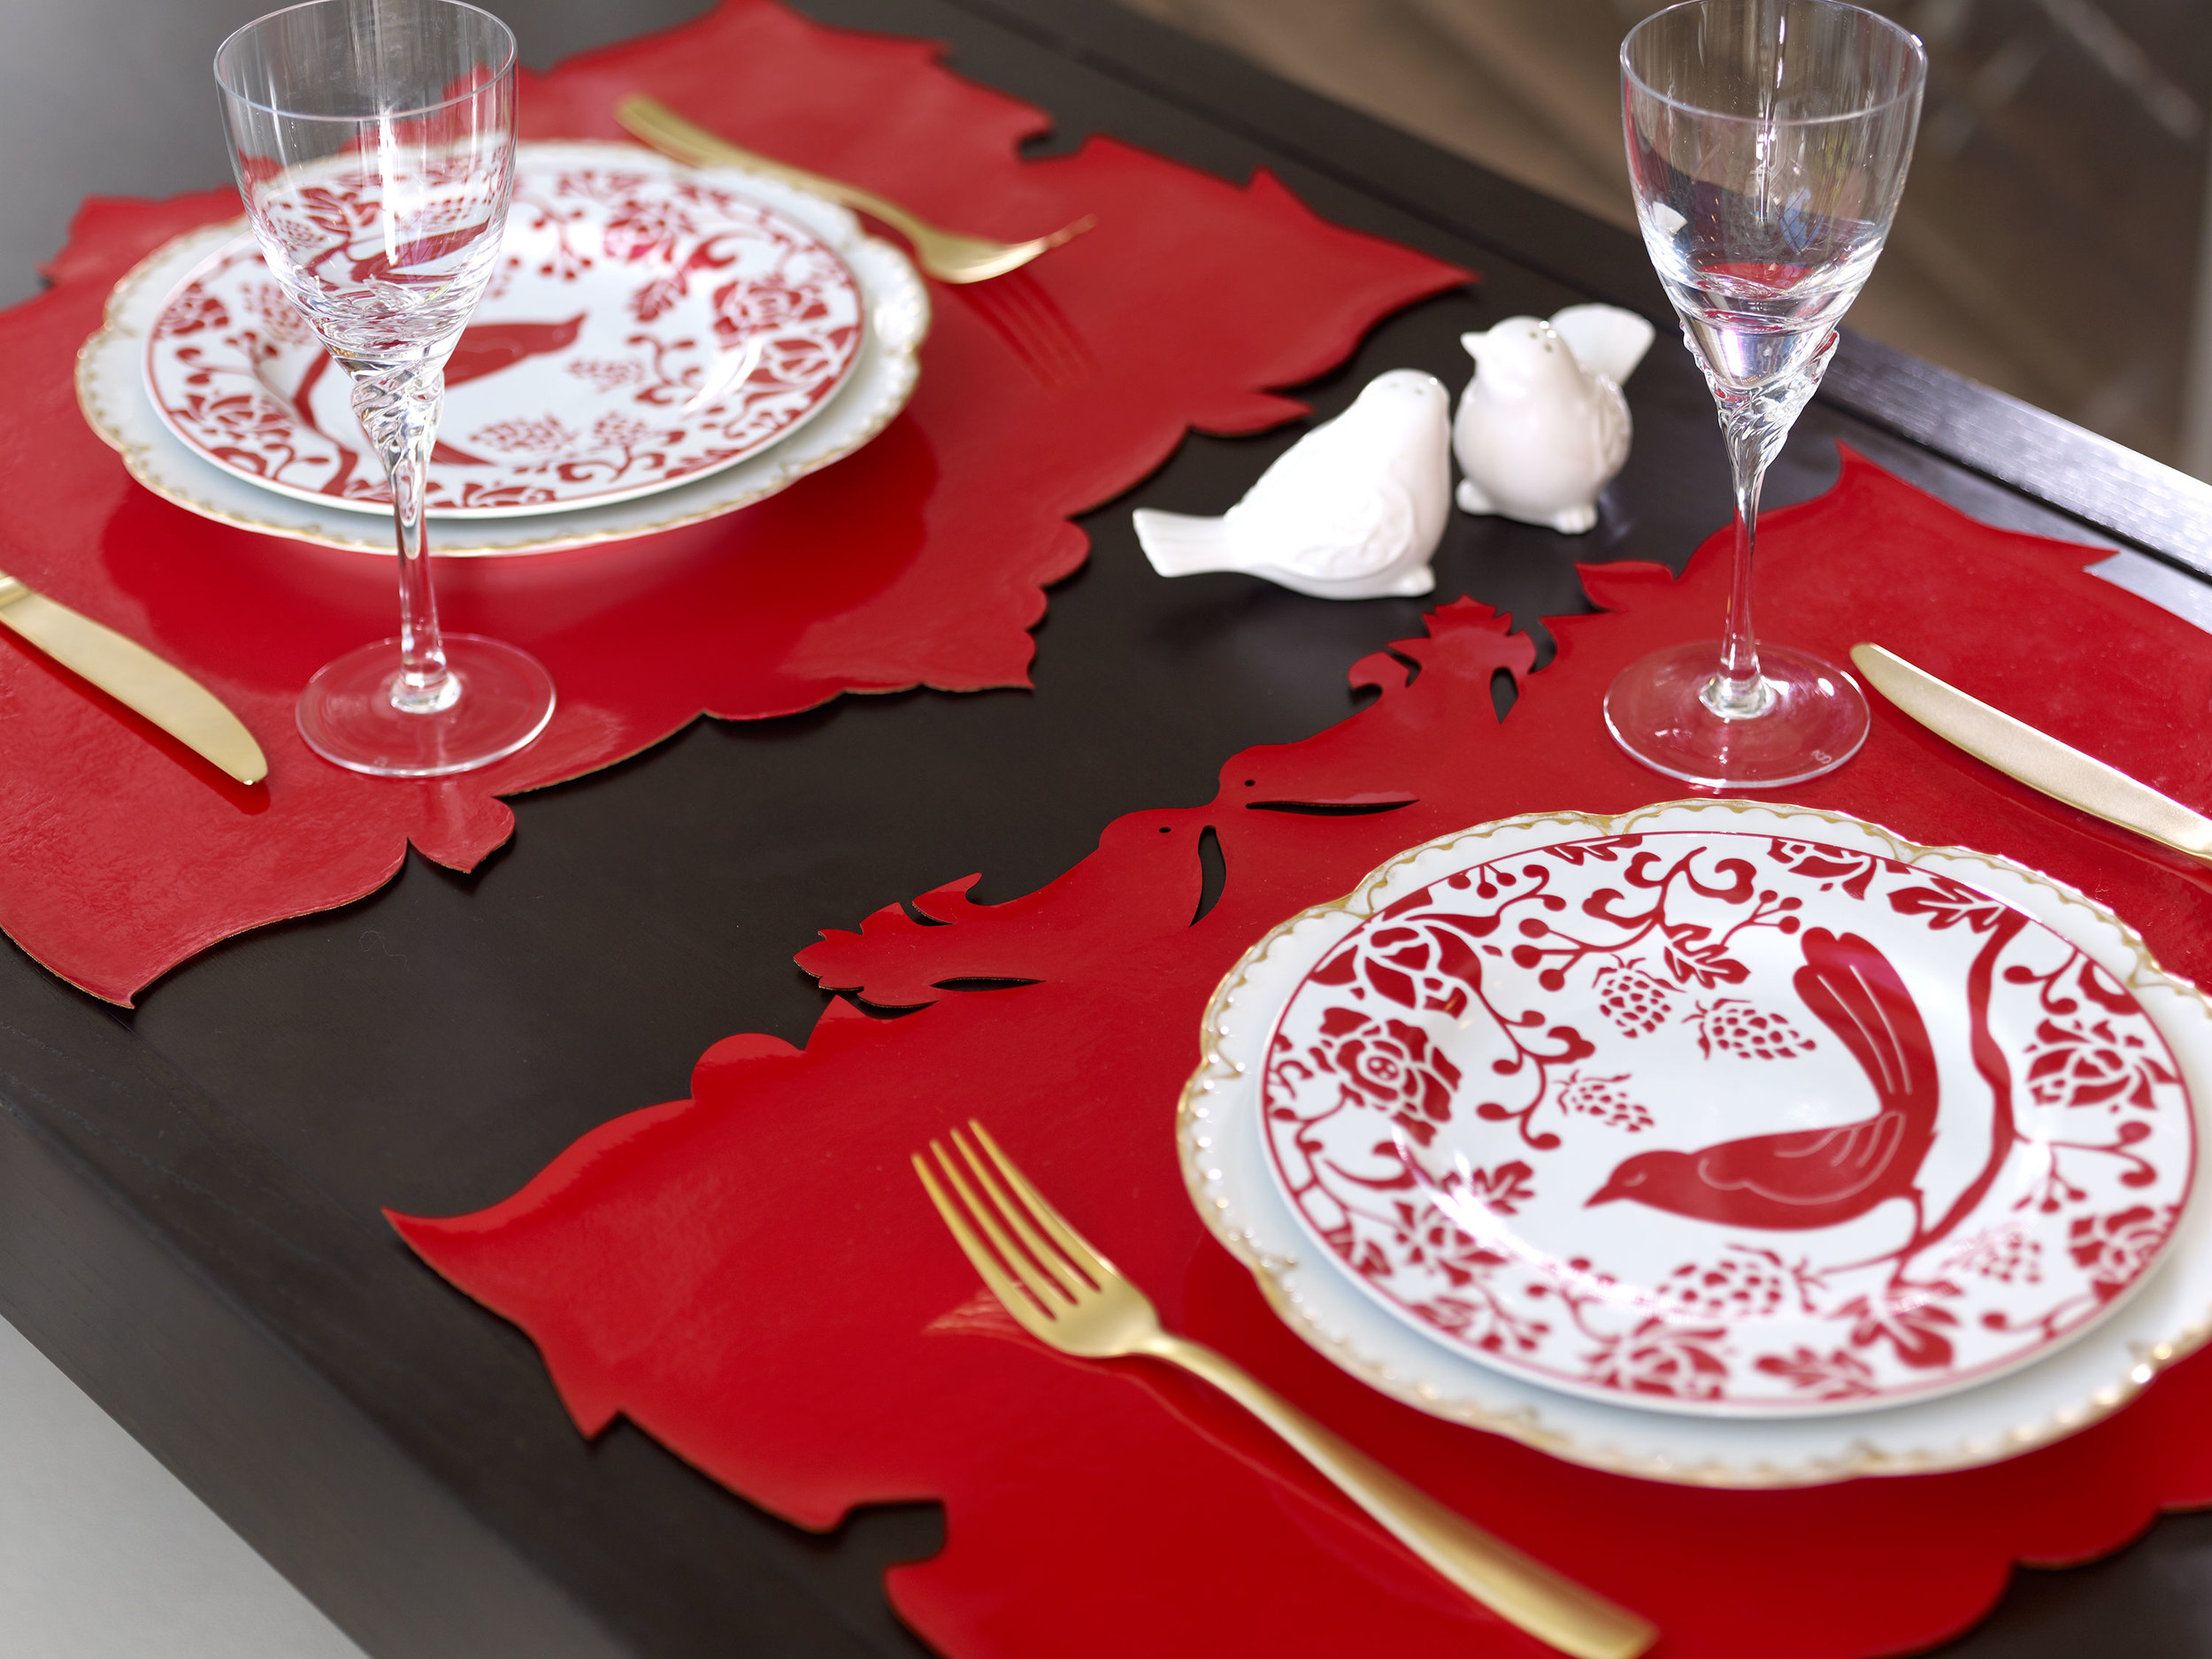 121206_Wildly_Wald_Placemats_0272